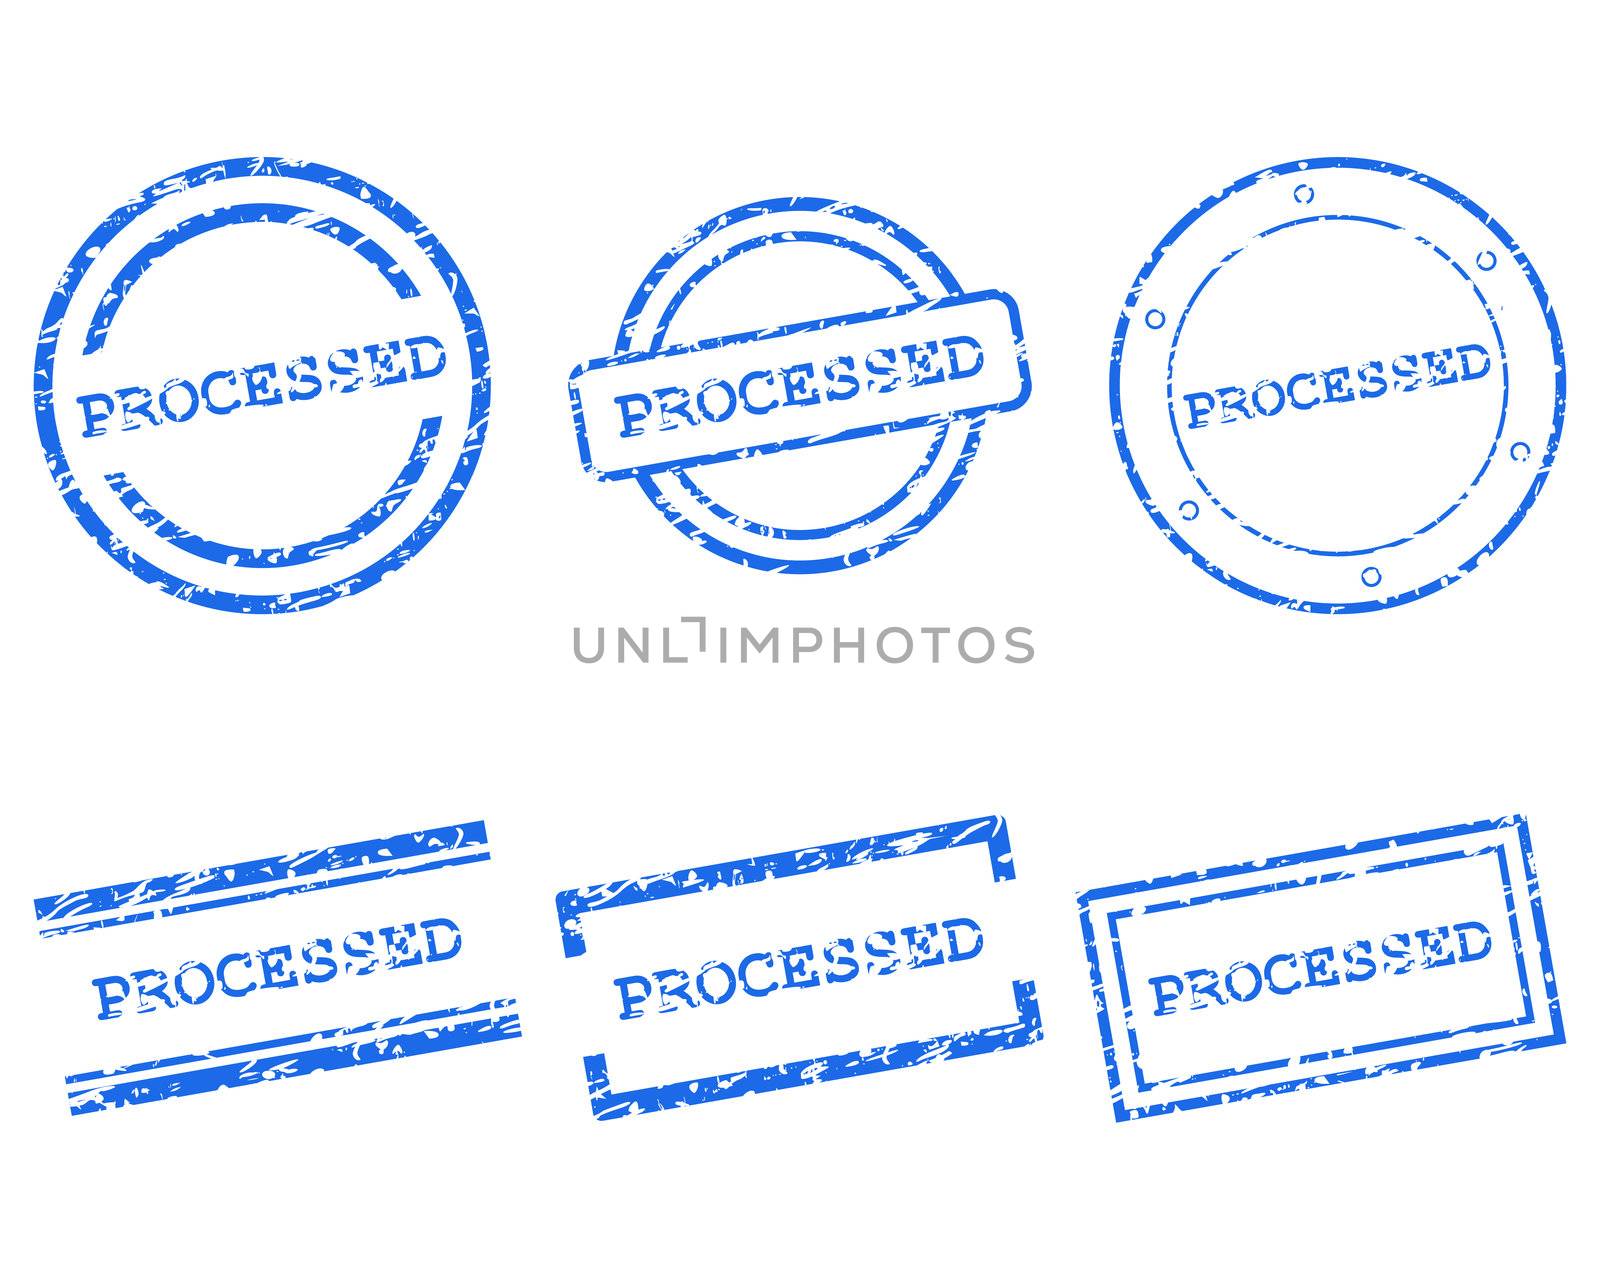 Processed stamps by rbiedermann